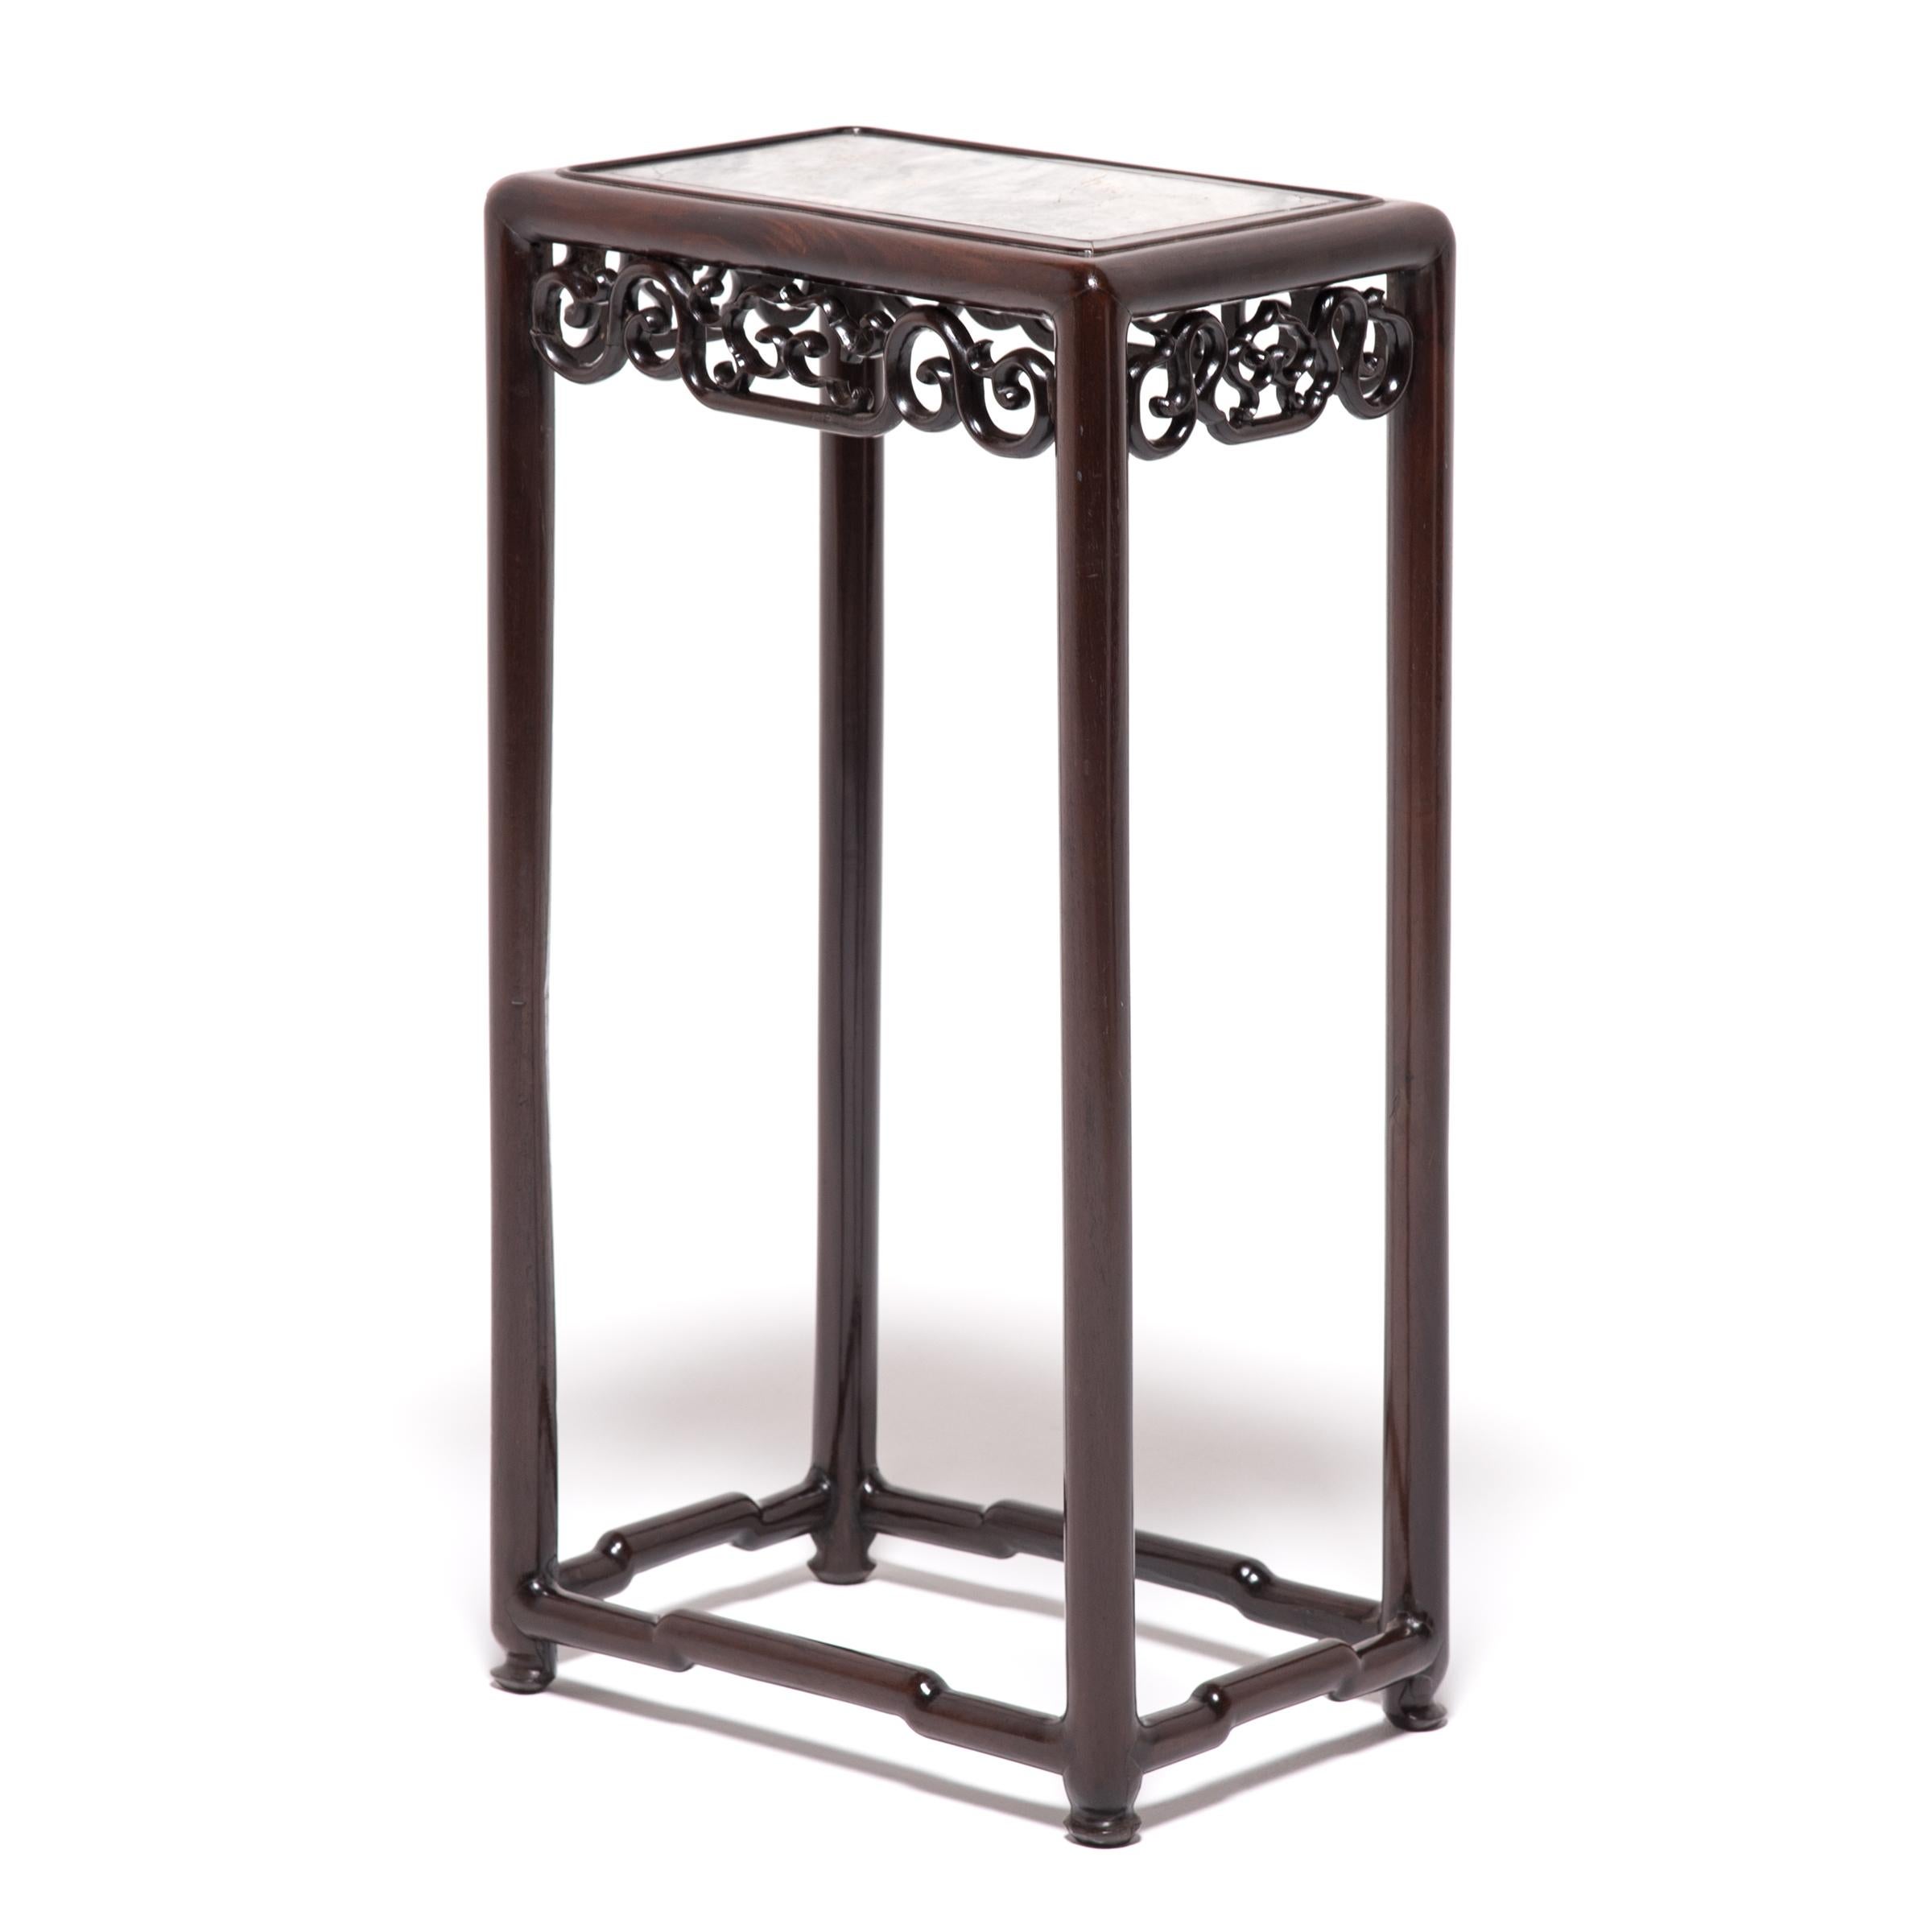 This elegant blackwood stand topped with marble was made in the bustling city of Shanghai during the Art Deco period. A product of the era, the table has an eclectic style of design that combines traditional craft motifs with bold, rich colors and